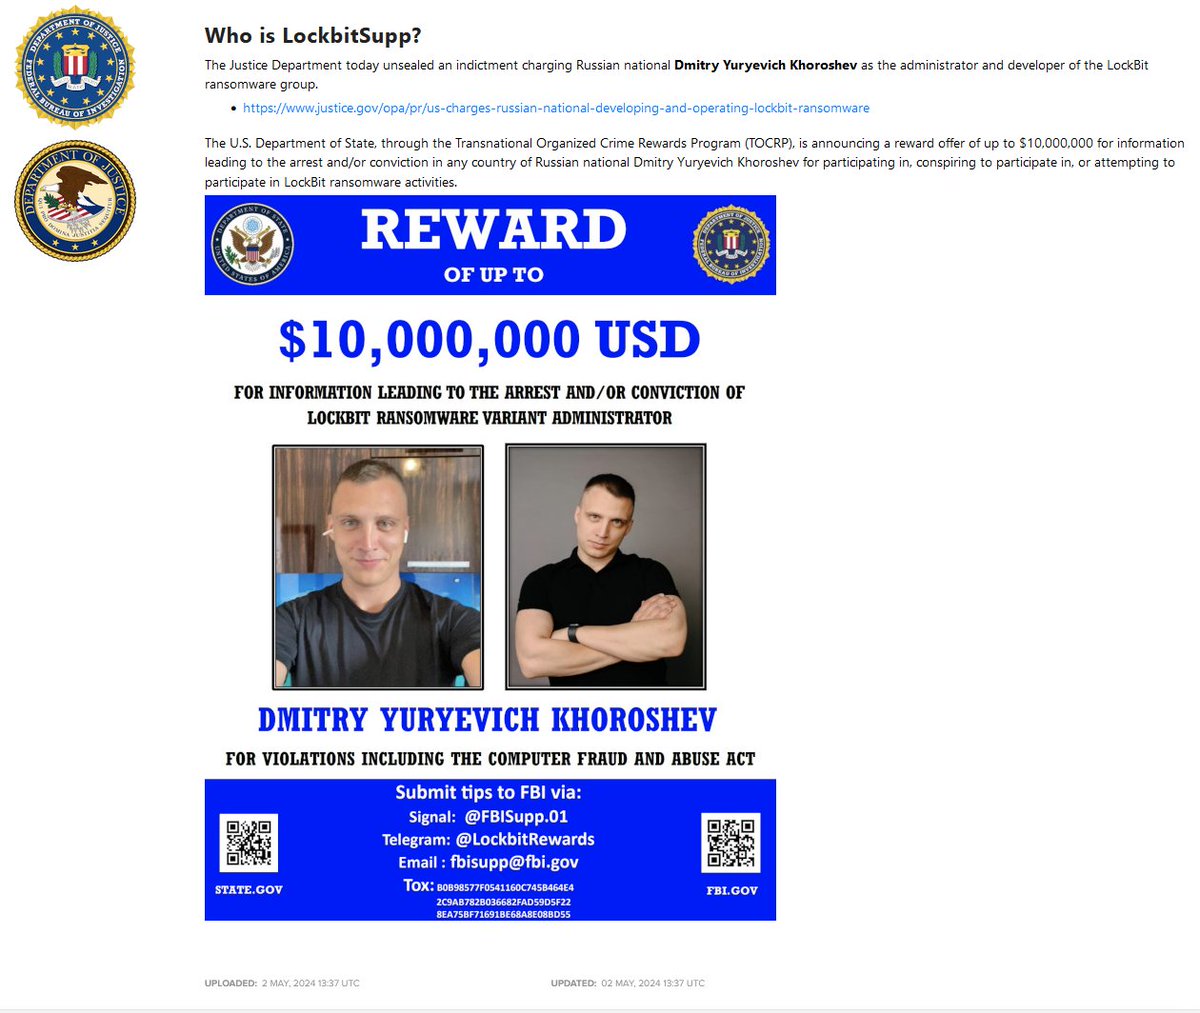 Today the United States Department of Justice unveiled the leader of Lockbit ransomware group.